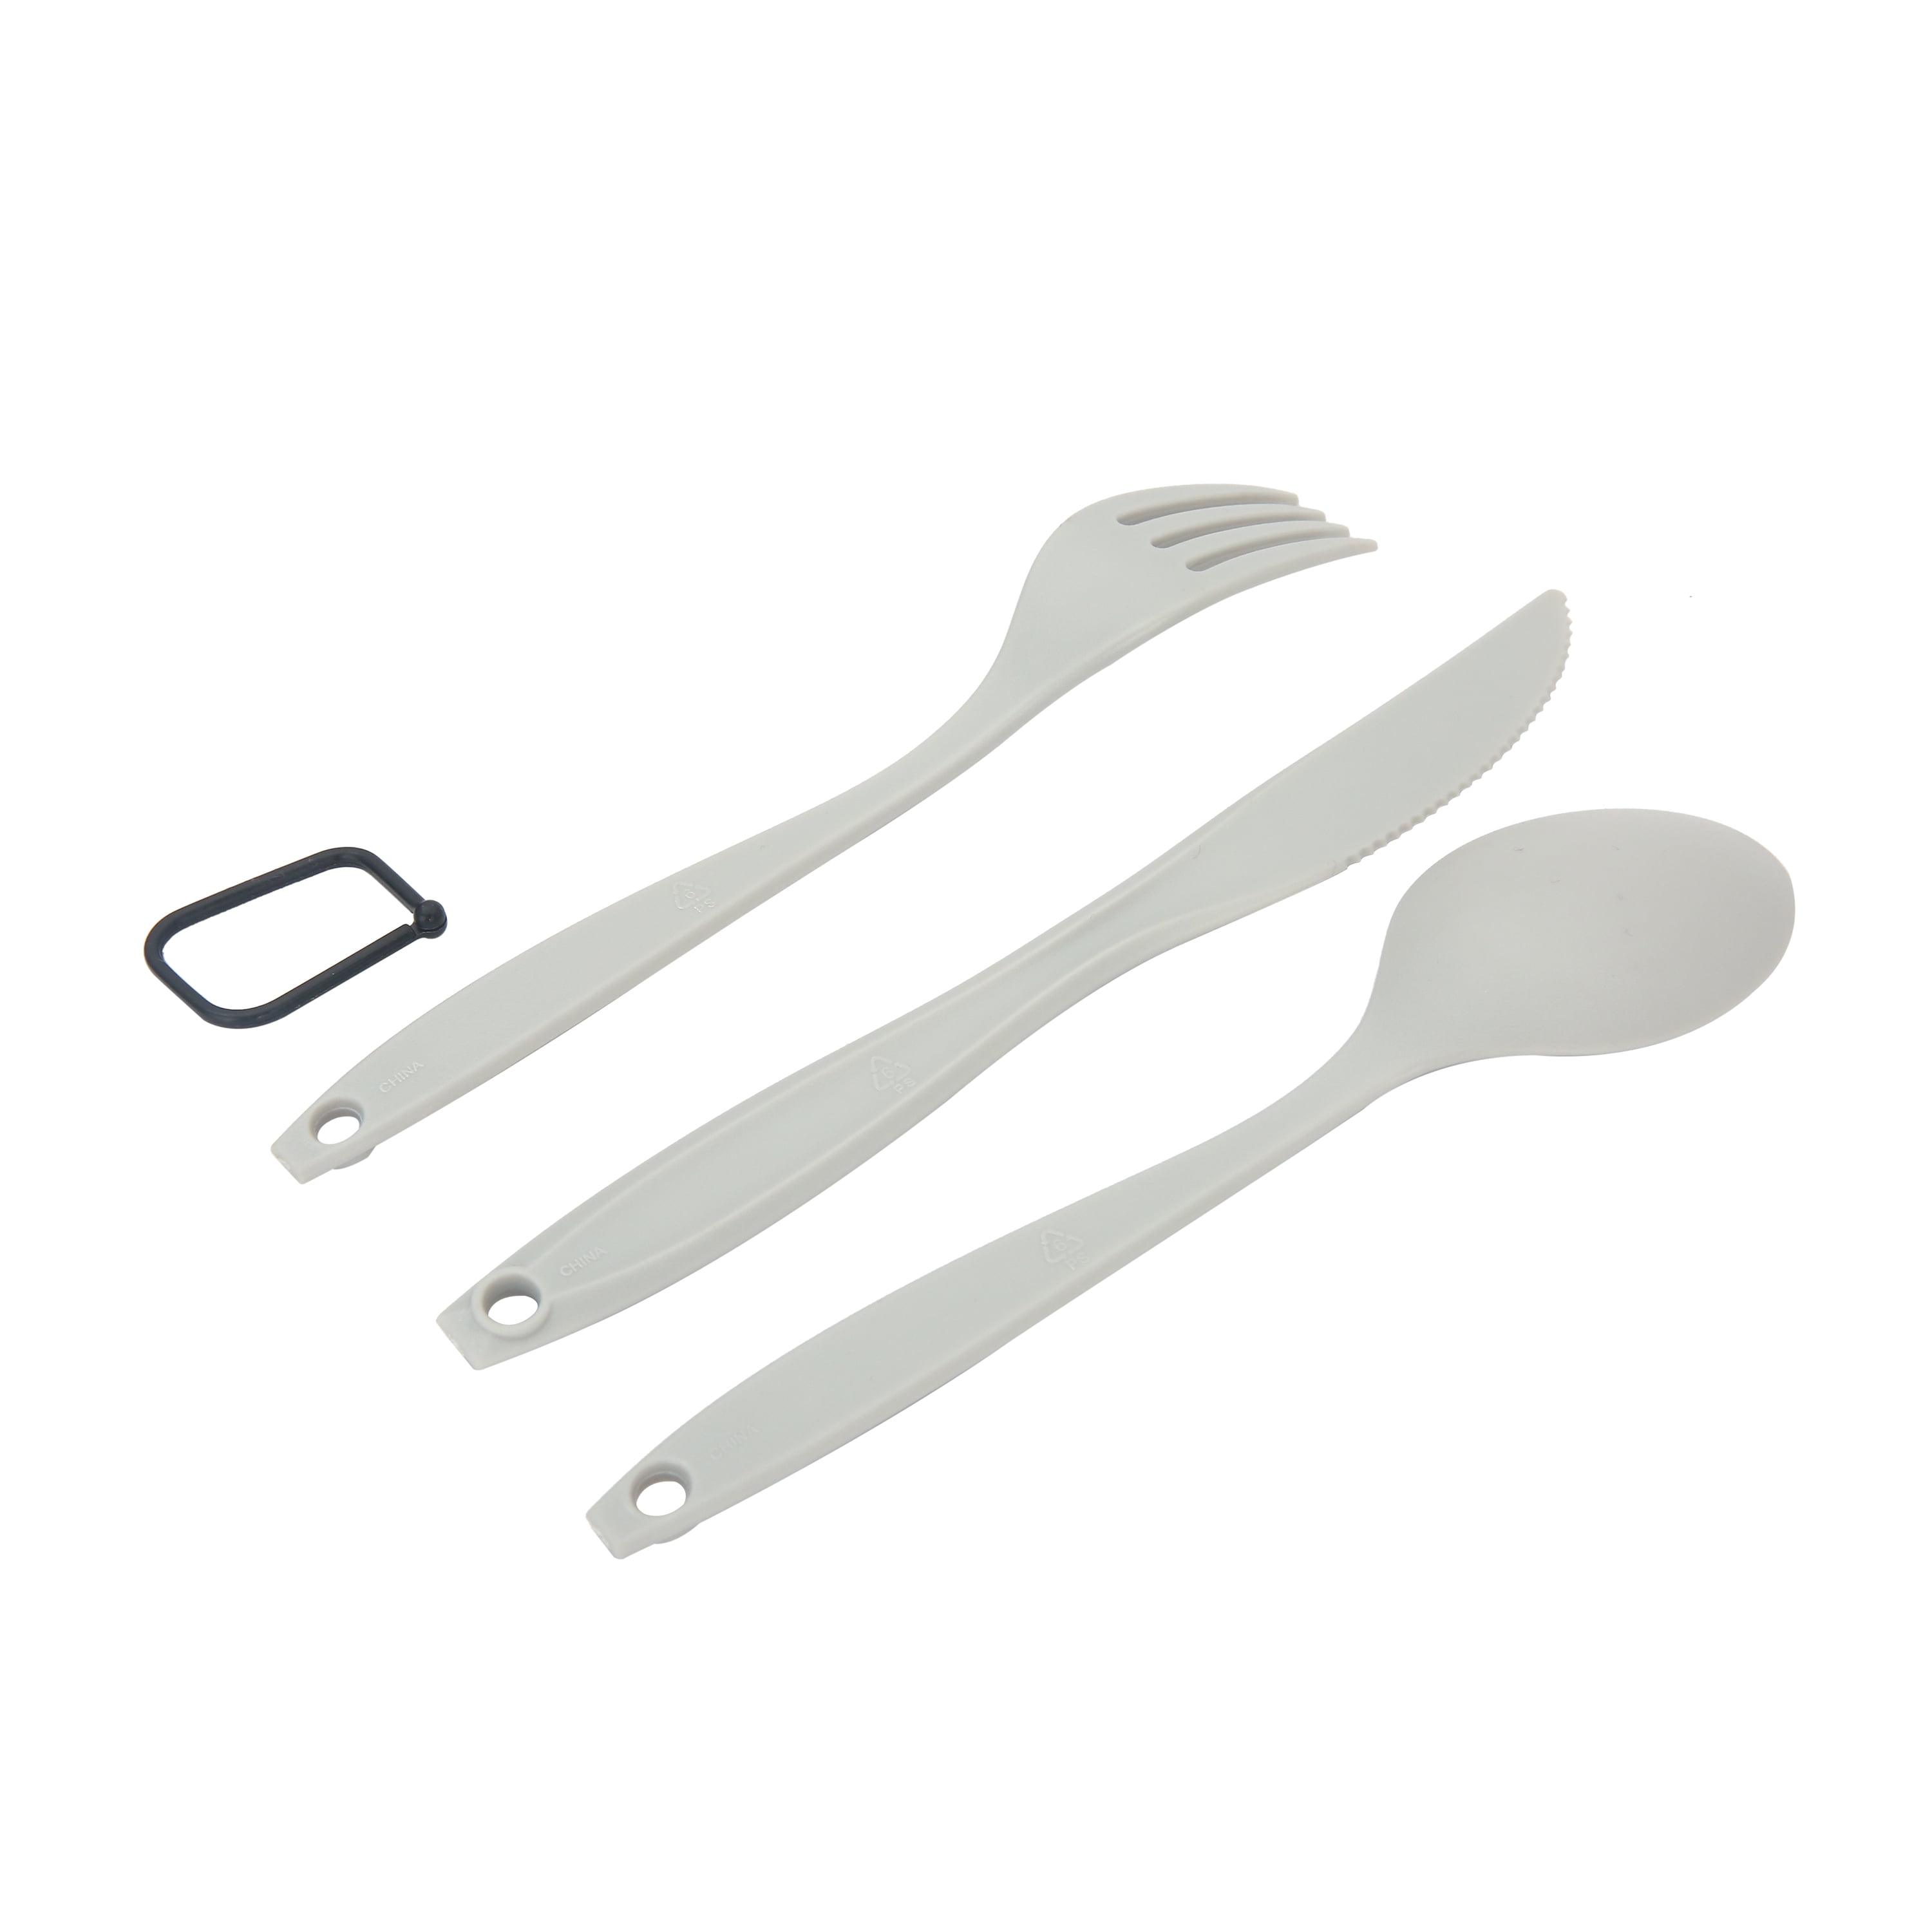 ZURSSEU Flatware, 3 Piece Camping Utensil Set, Forks, Knives and Spoon –  MoxSole